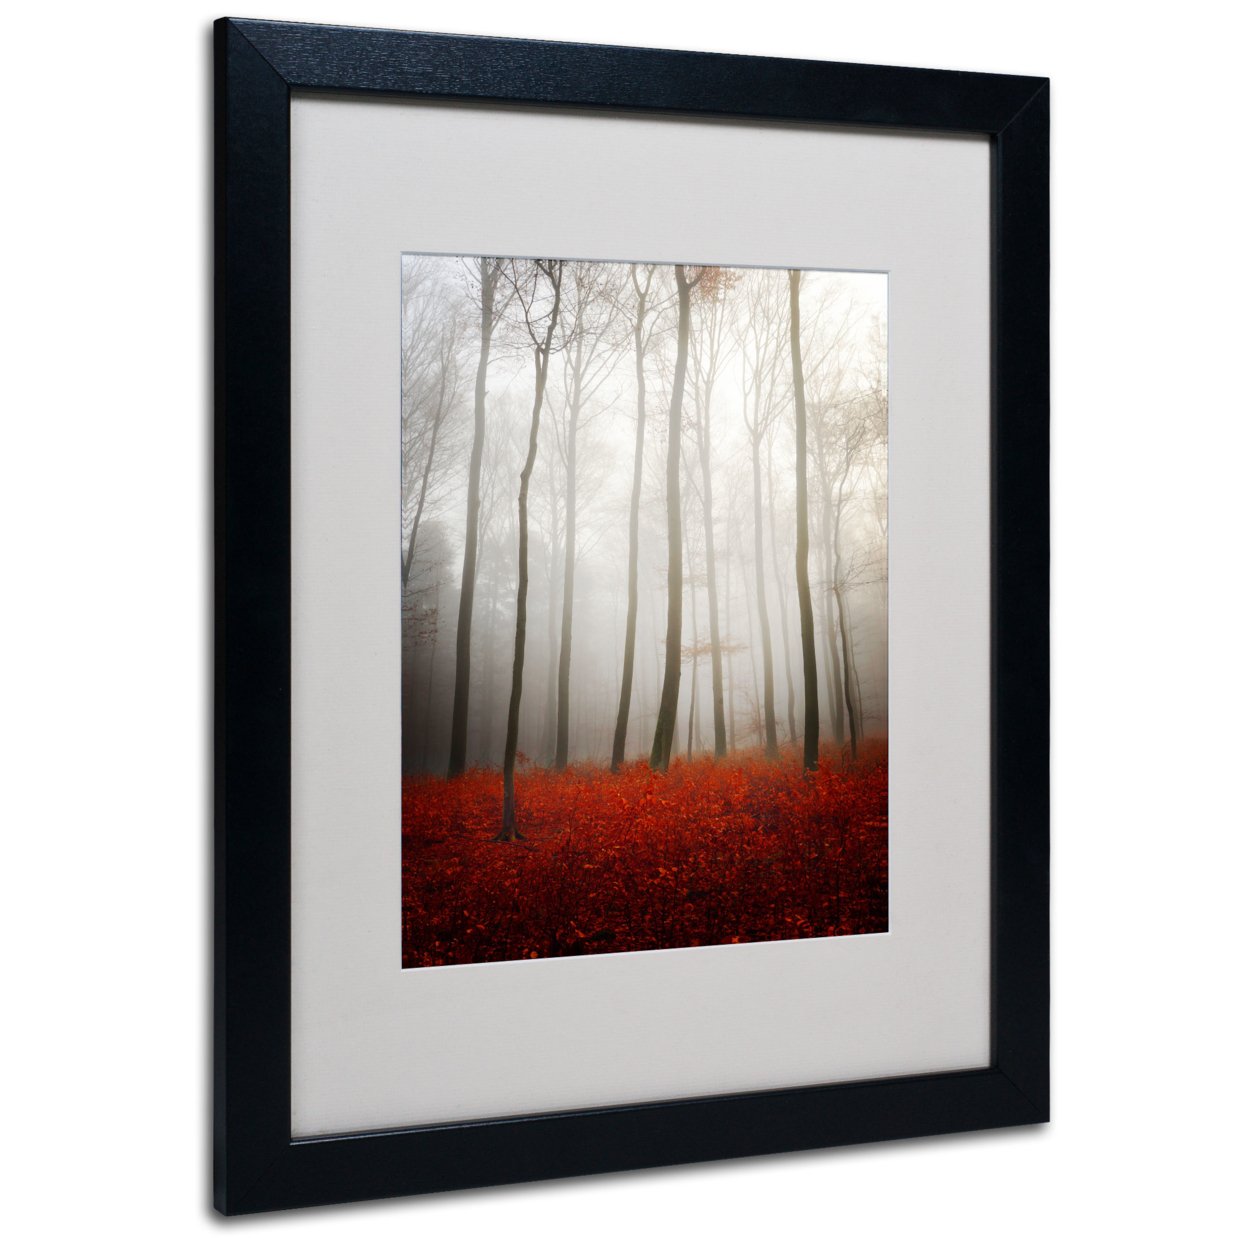 Philippe Sainte-Laudy 'Leafless' Black Wooden Framed Art 18 X 22 Inches